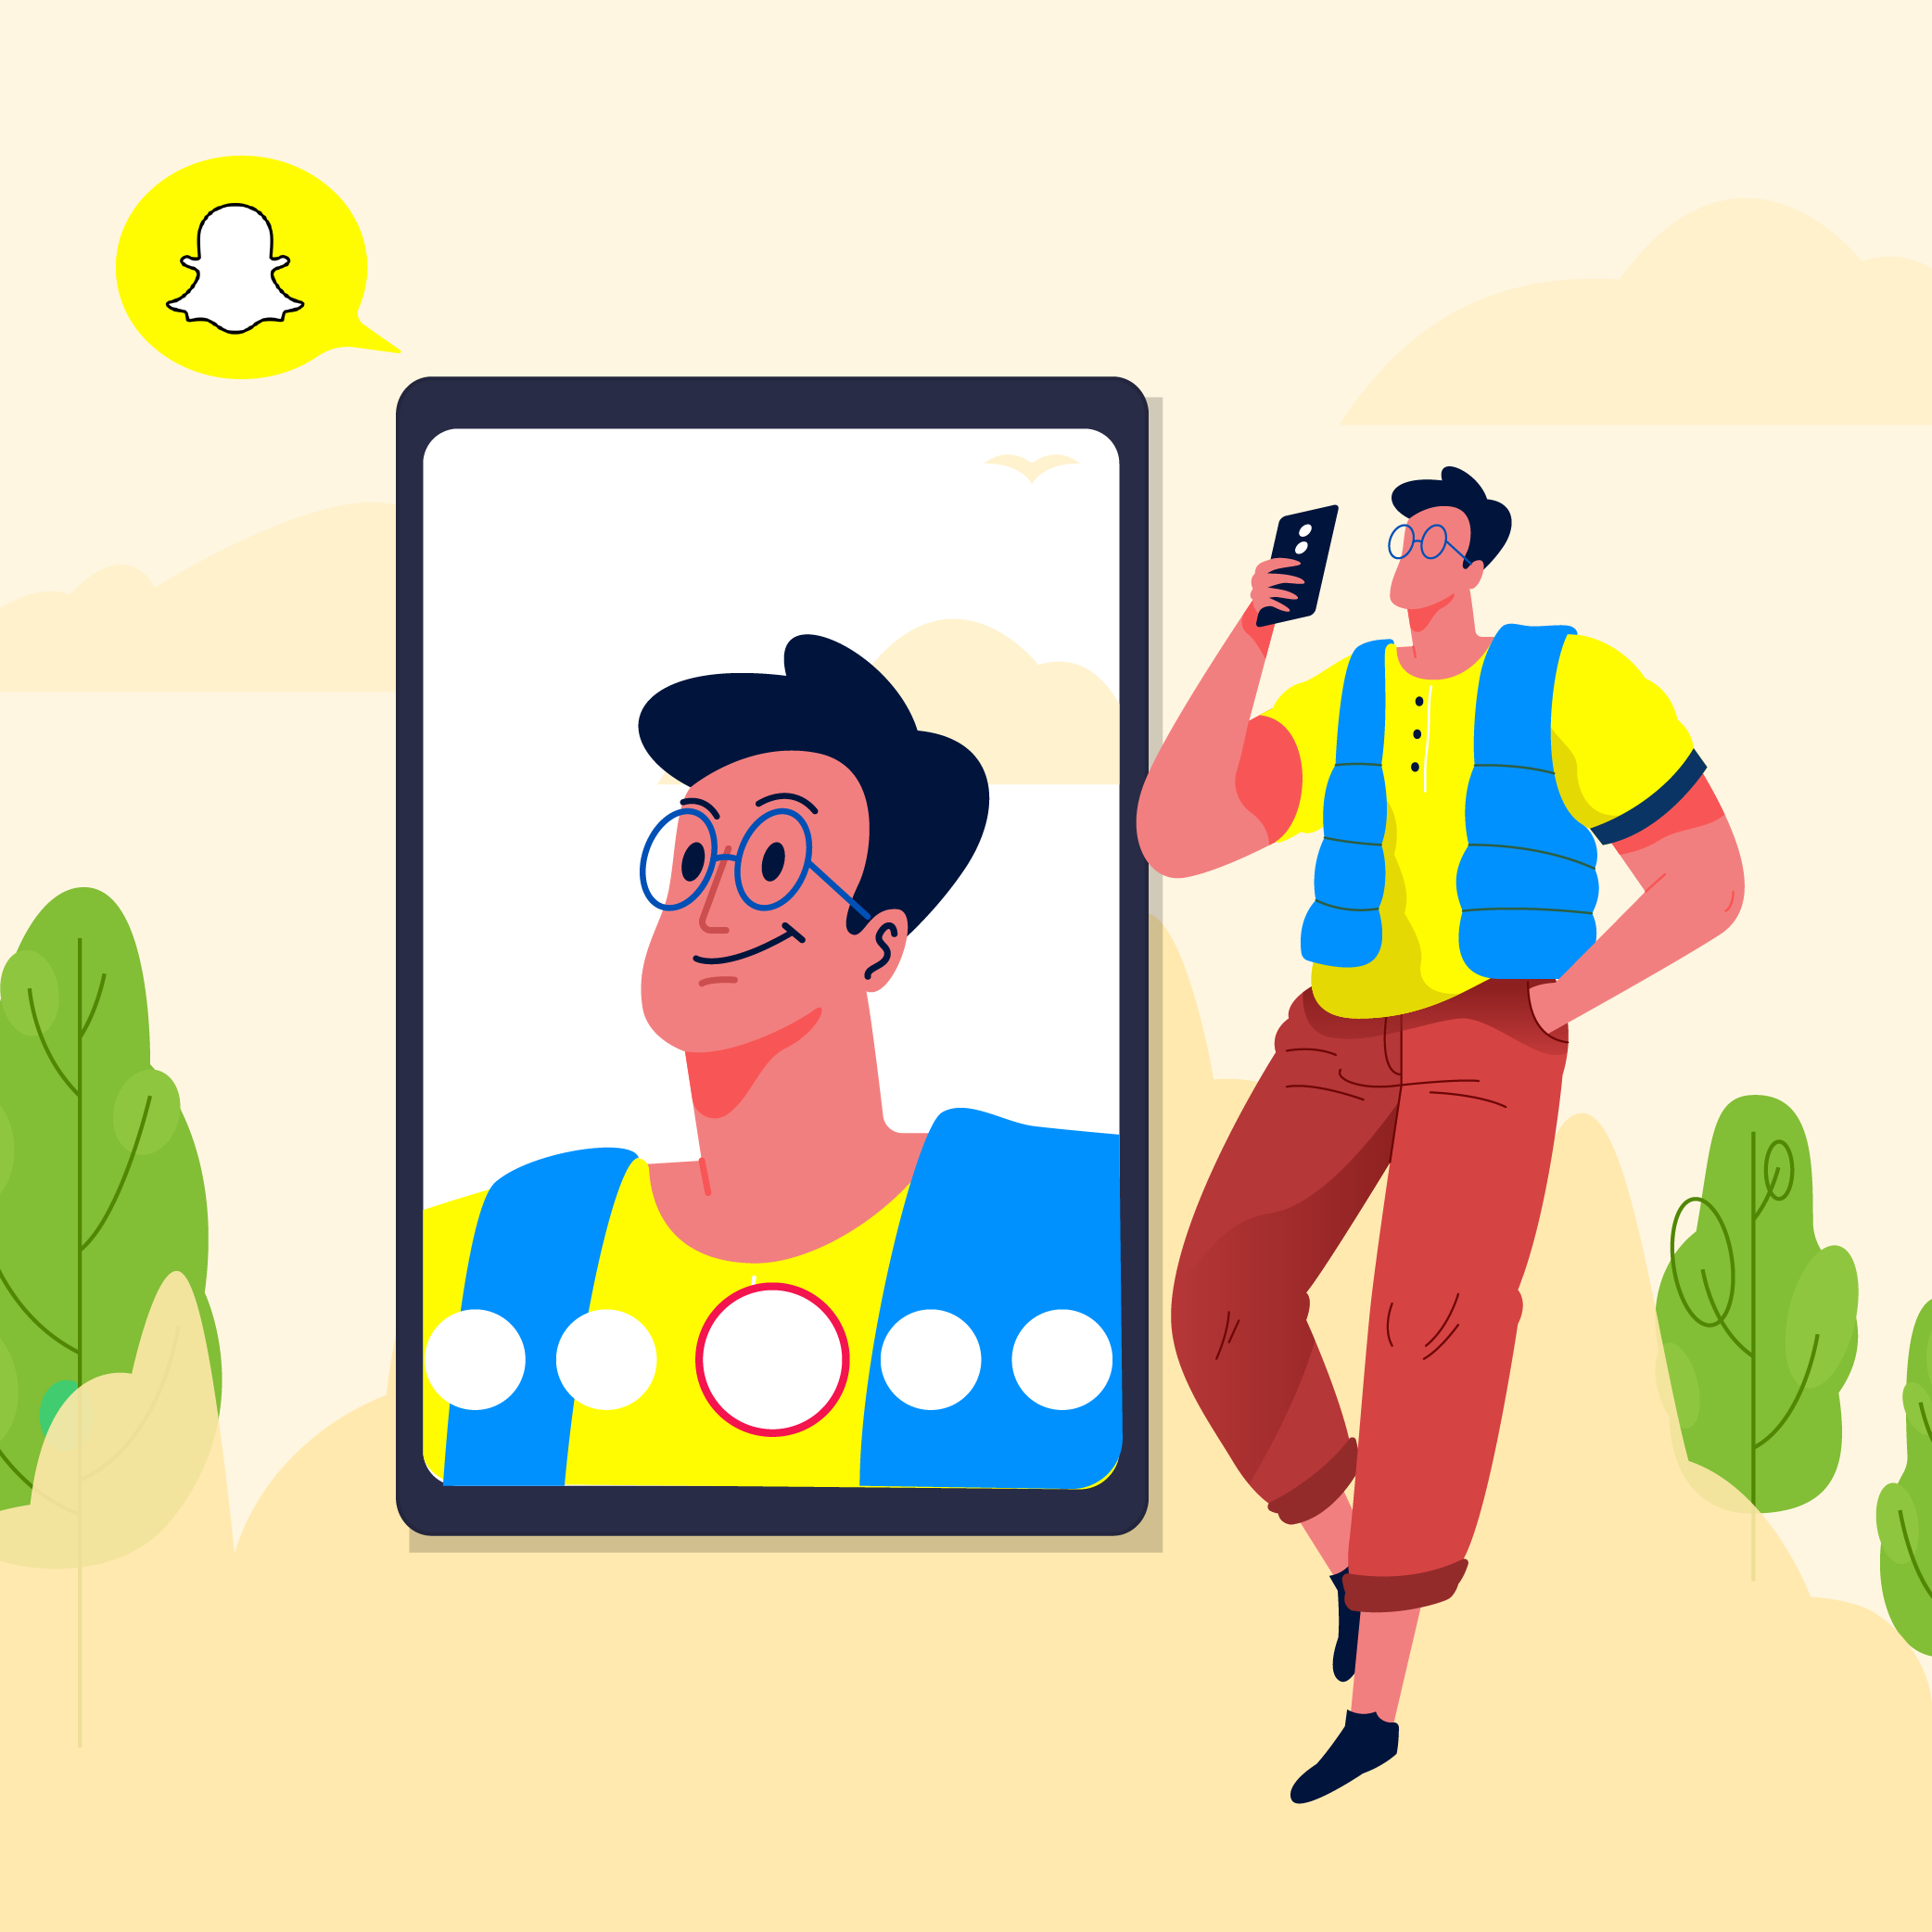 Spectacles from Snapchat, a better Way We Record Your Videos